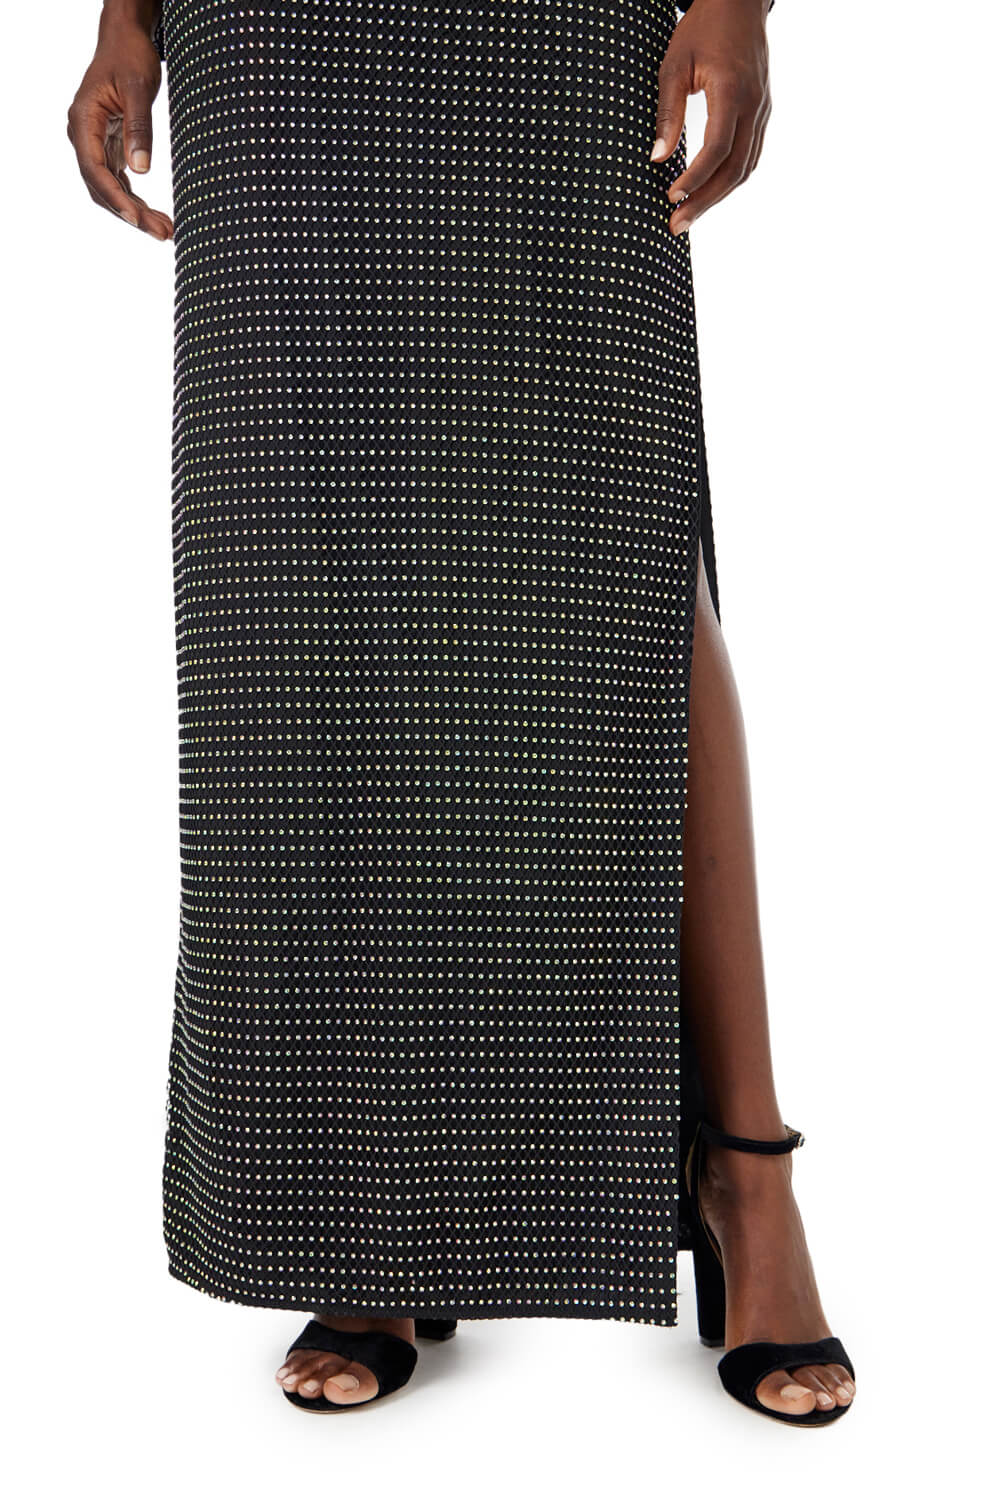 ML Monique Lhuillier long sleeve black dress with crystal dots all-over and side leg slit.